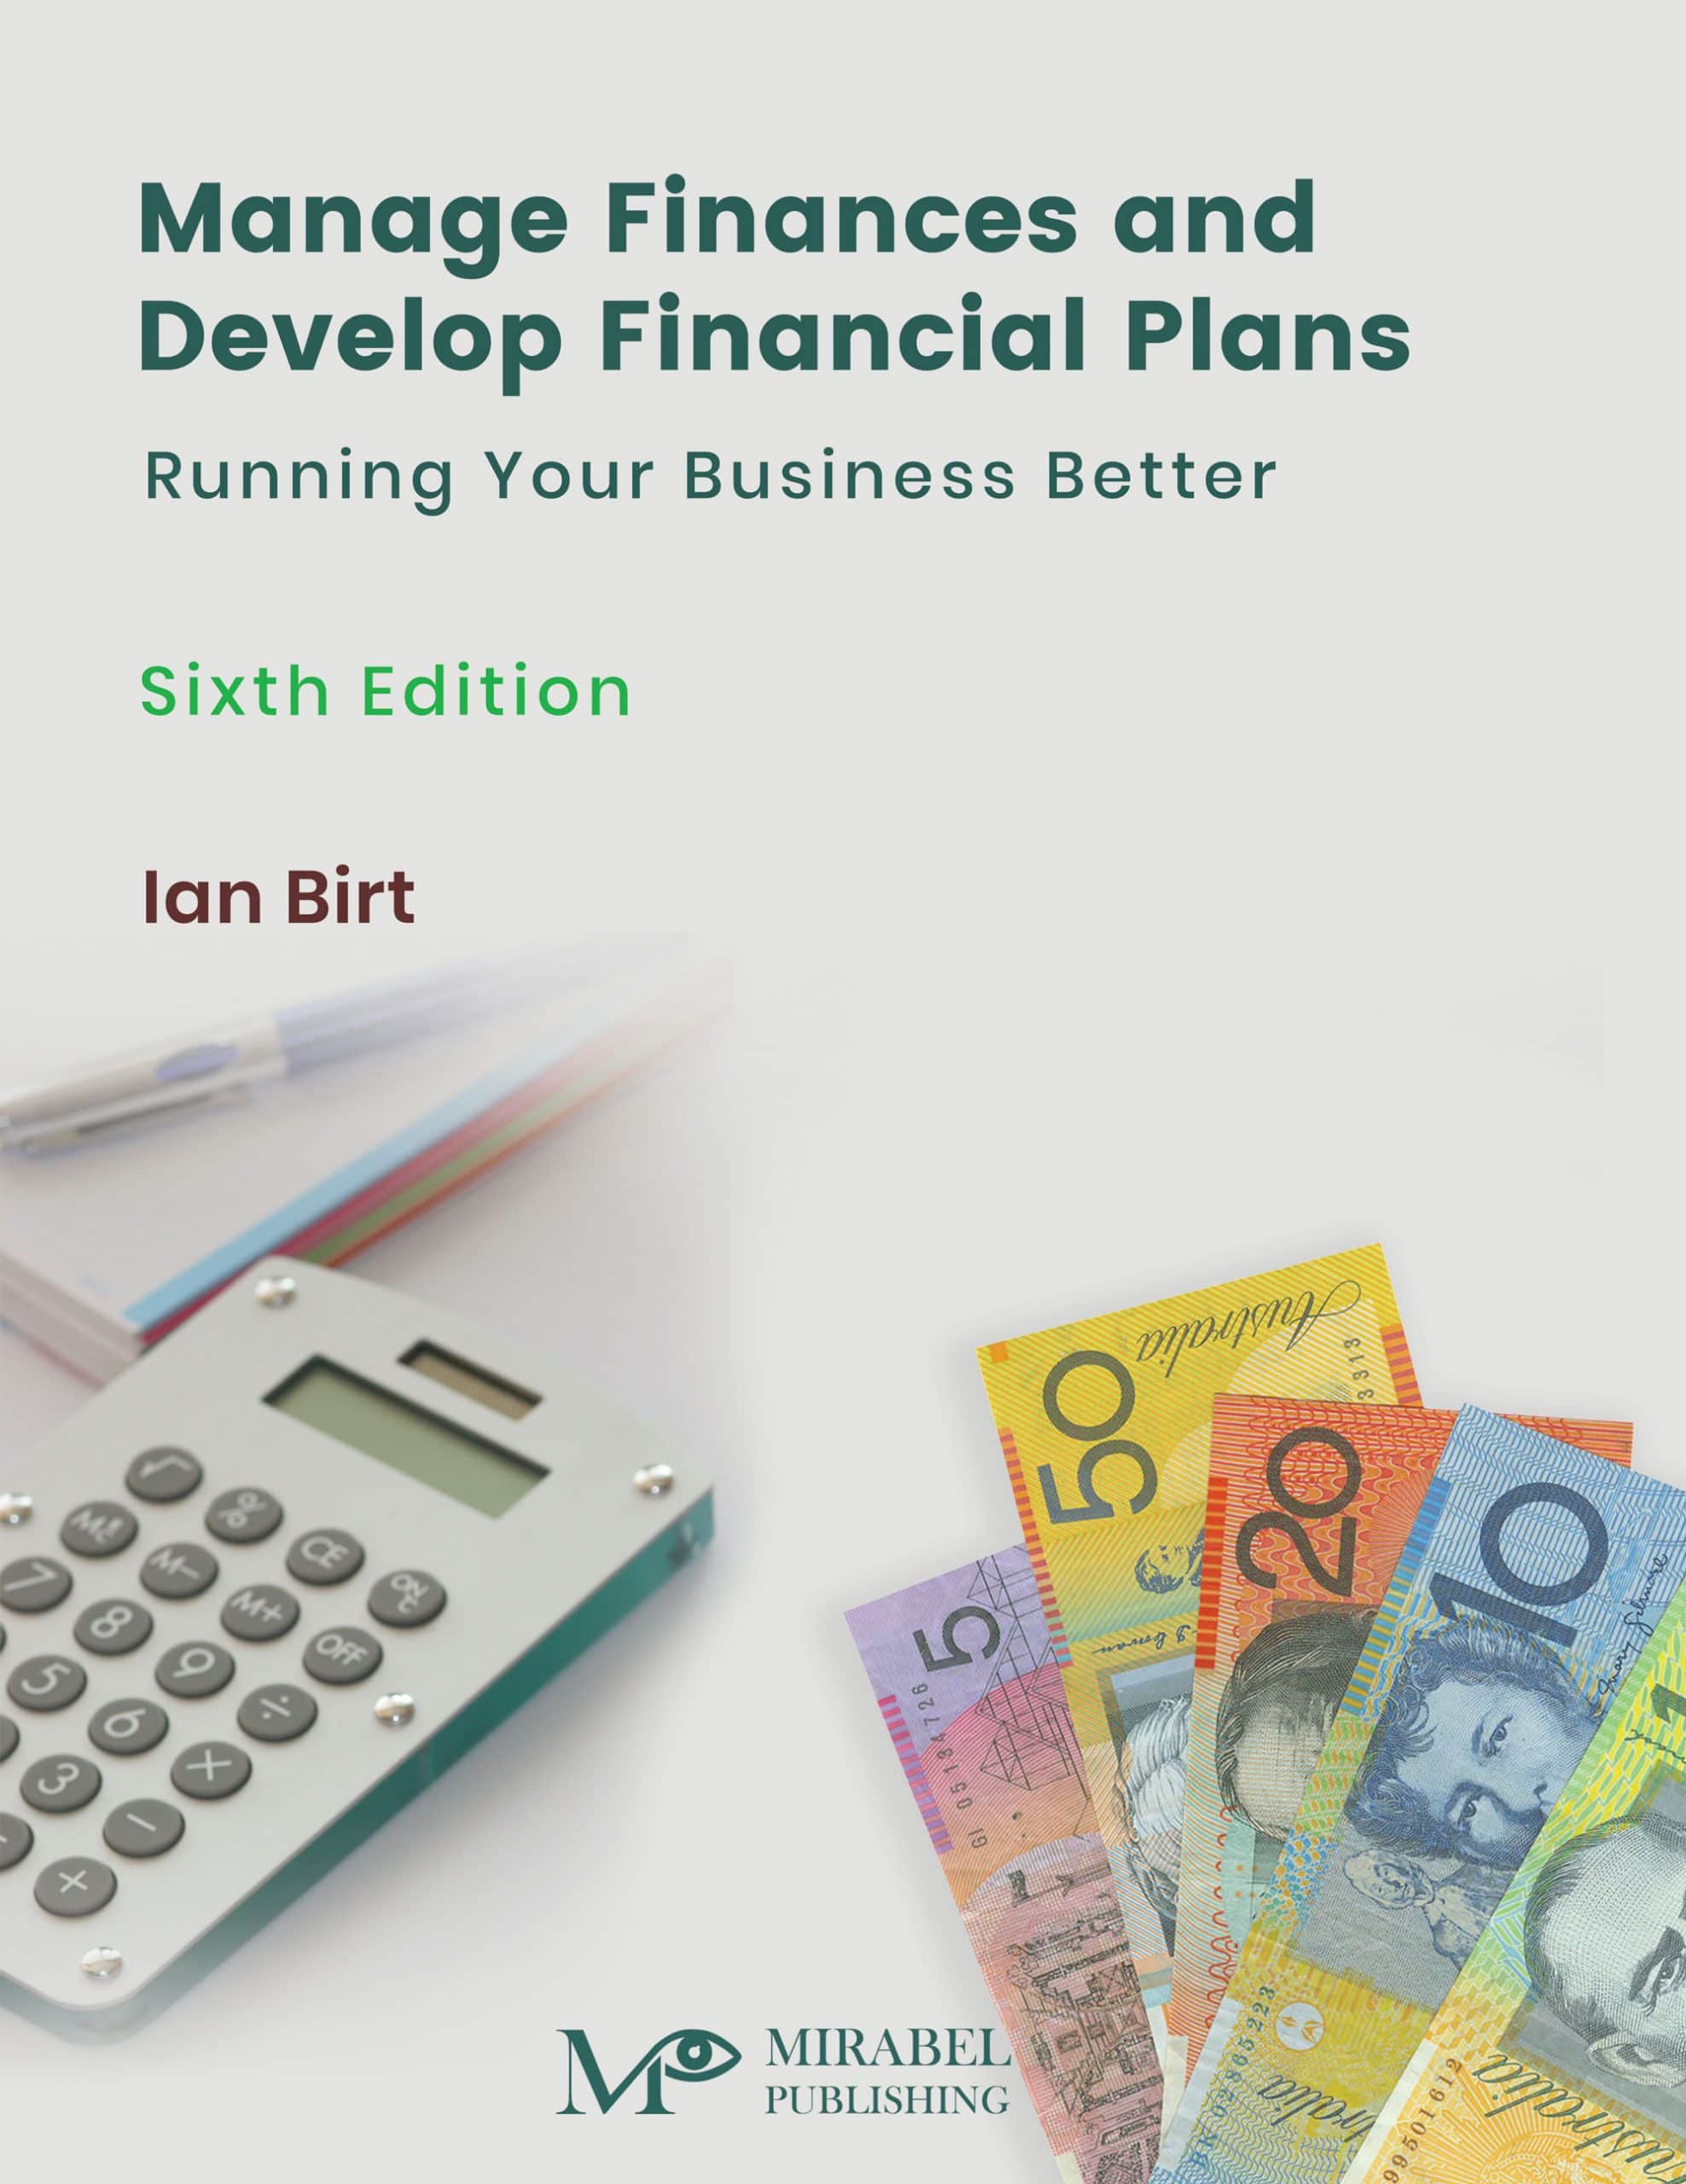 Manage Finances and Develop Financial Plans (Sixth Edition)